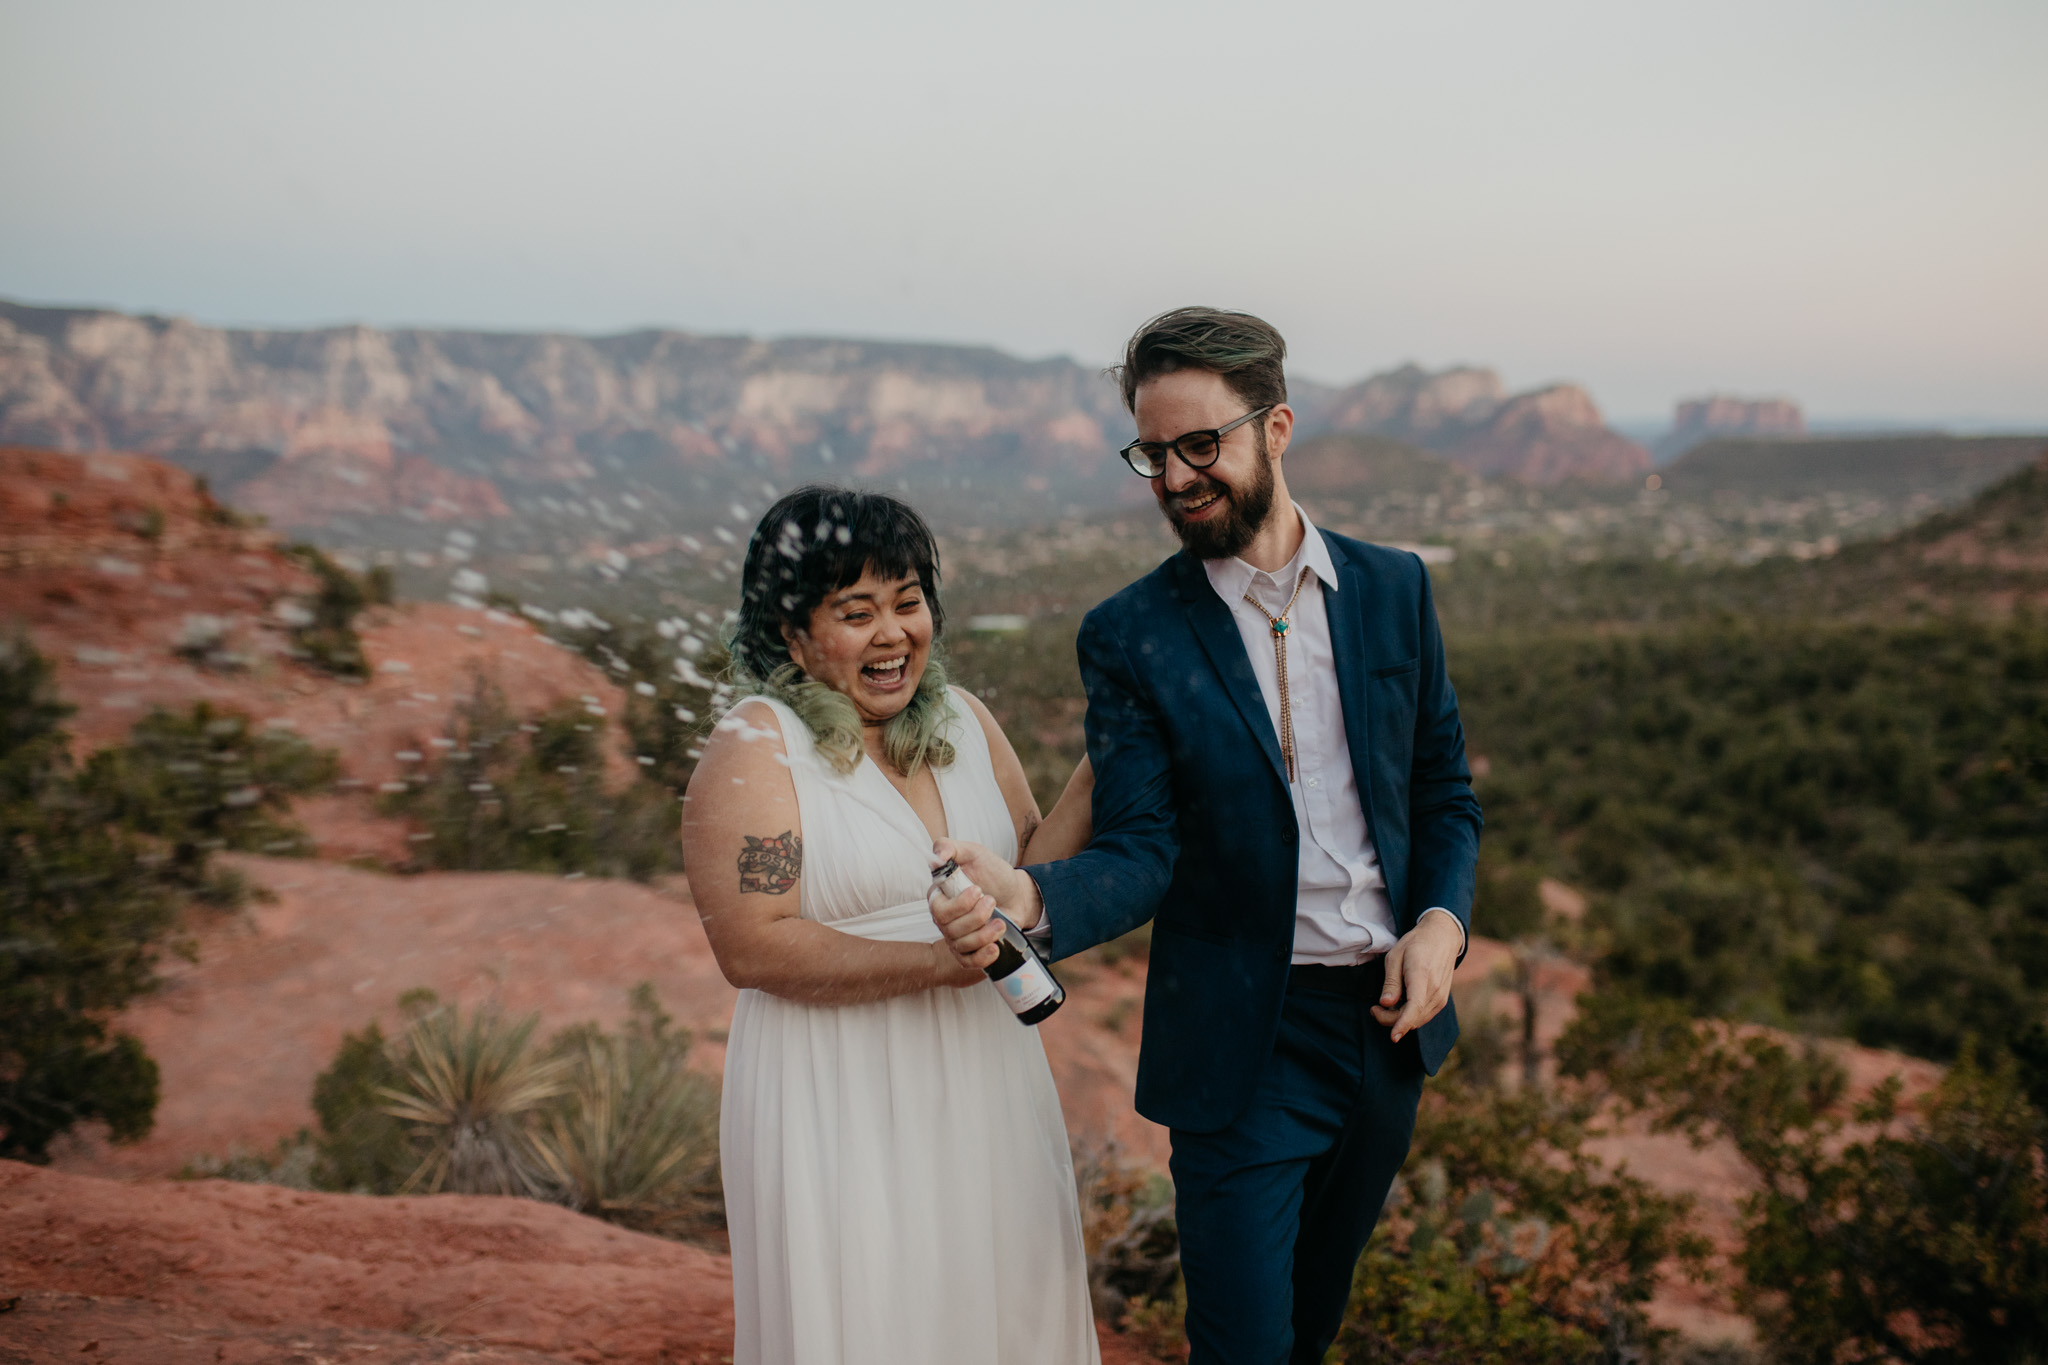 Elopement Activities for a Unique Experience - Popping Champagne